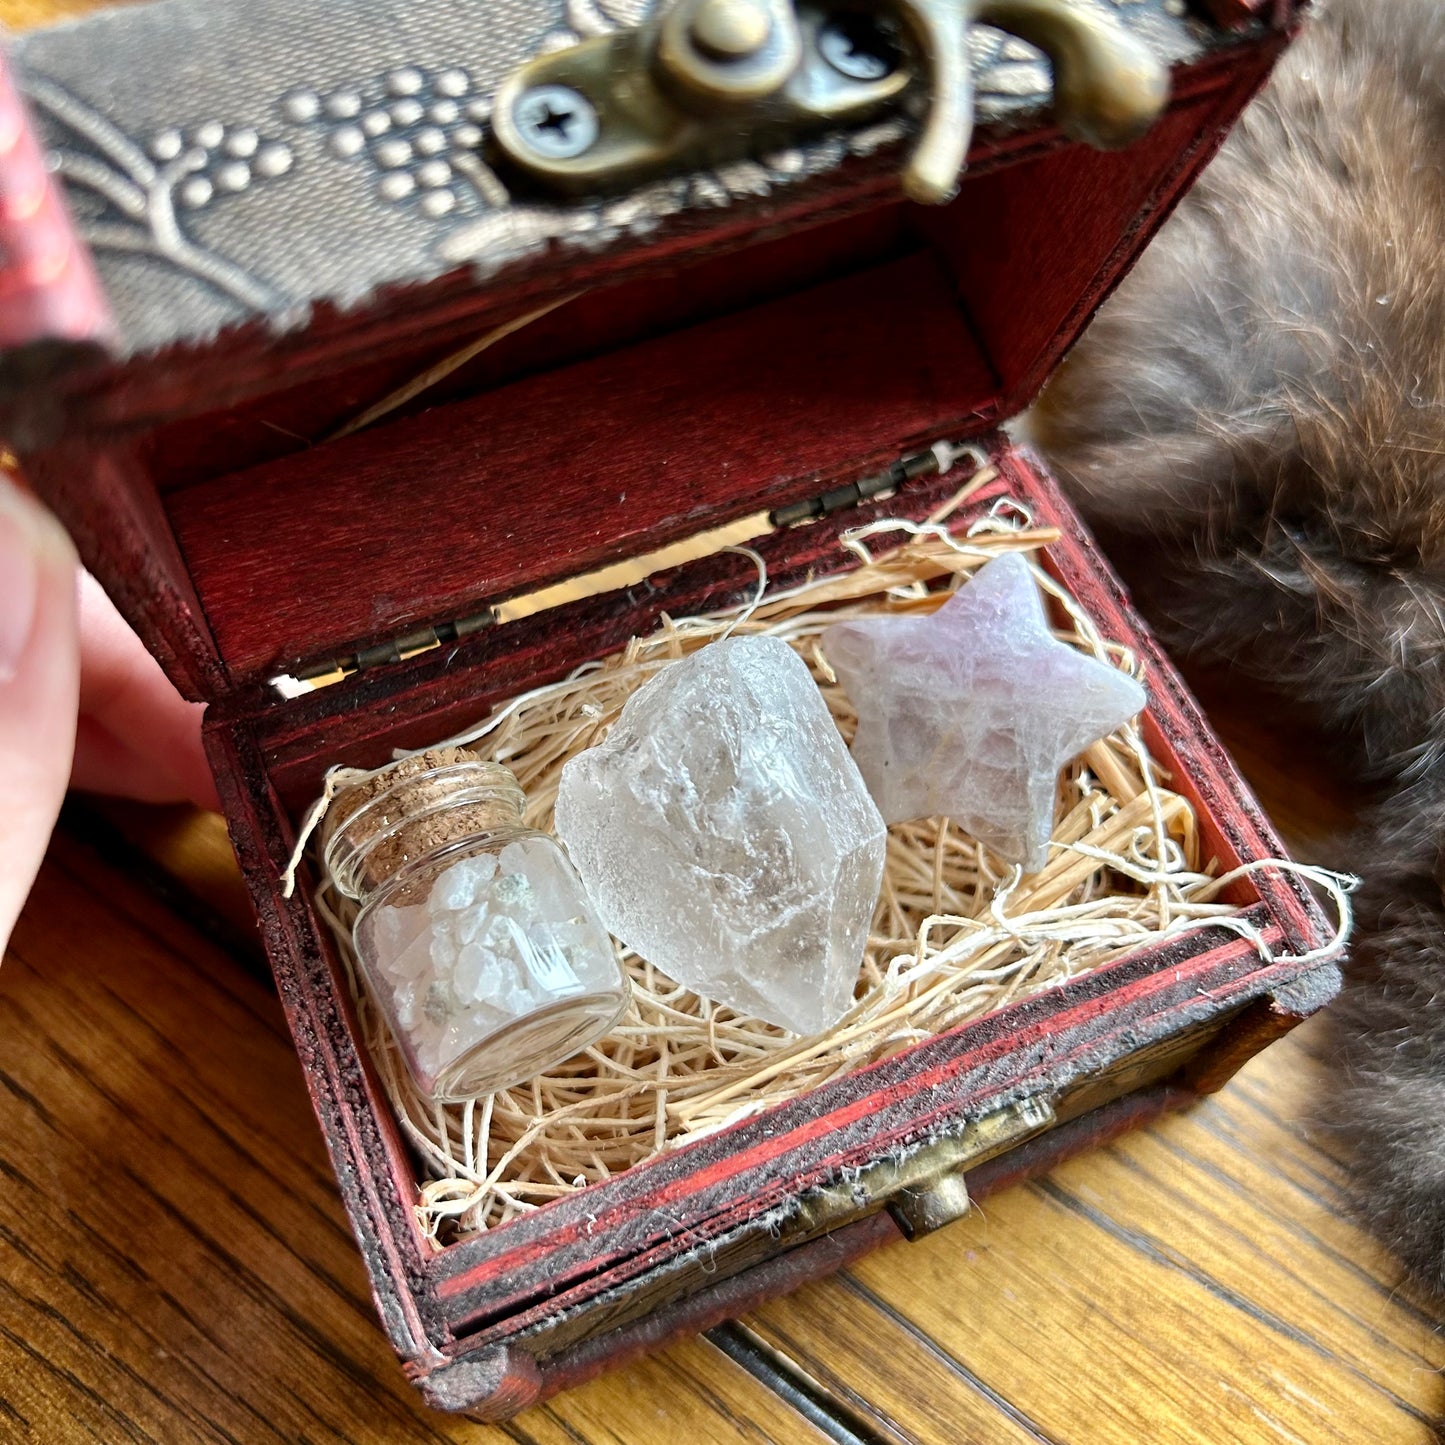 Peace and Tranquility Crystal Bundle Treasure Chest - Ignite the light / Alberta Laser Engraving